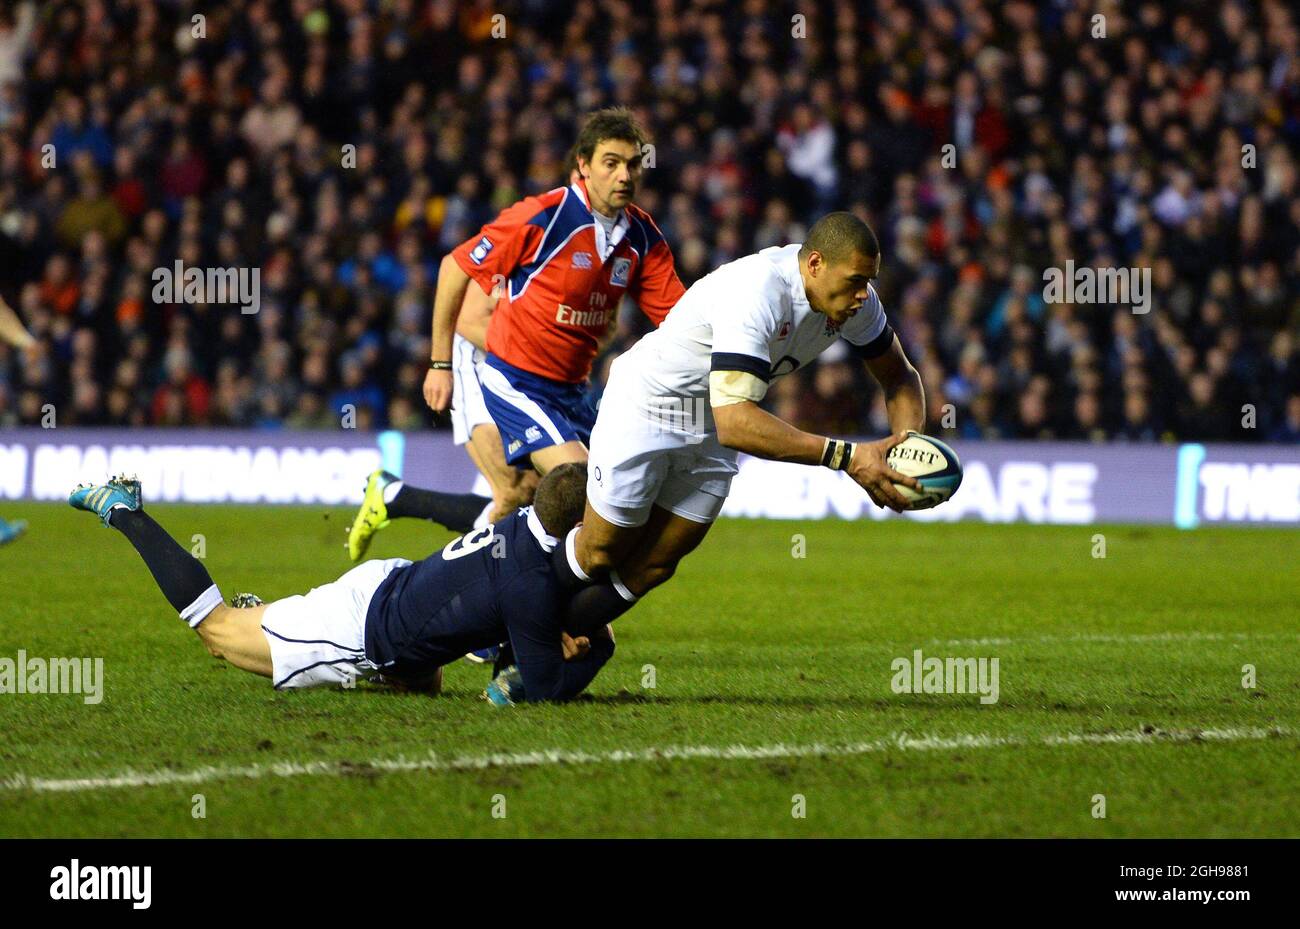 Luther Burrell of England scores the first try during the RBS 6Nations match between Scotland and England at Murrayfield Stadium, Edinburgh on February 8, 2014. Stock Photo